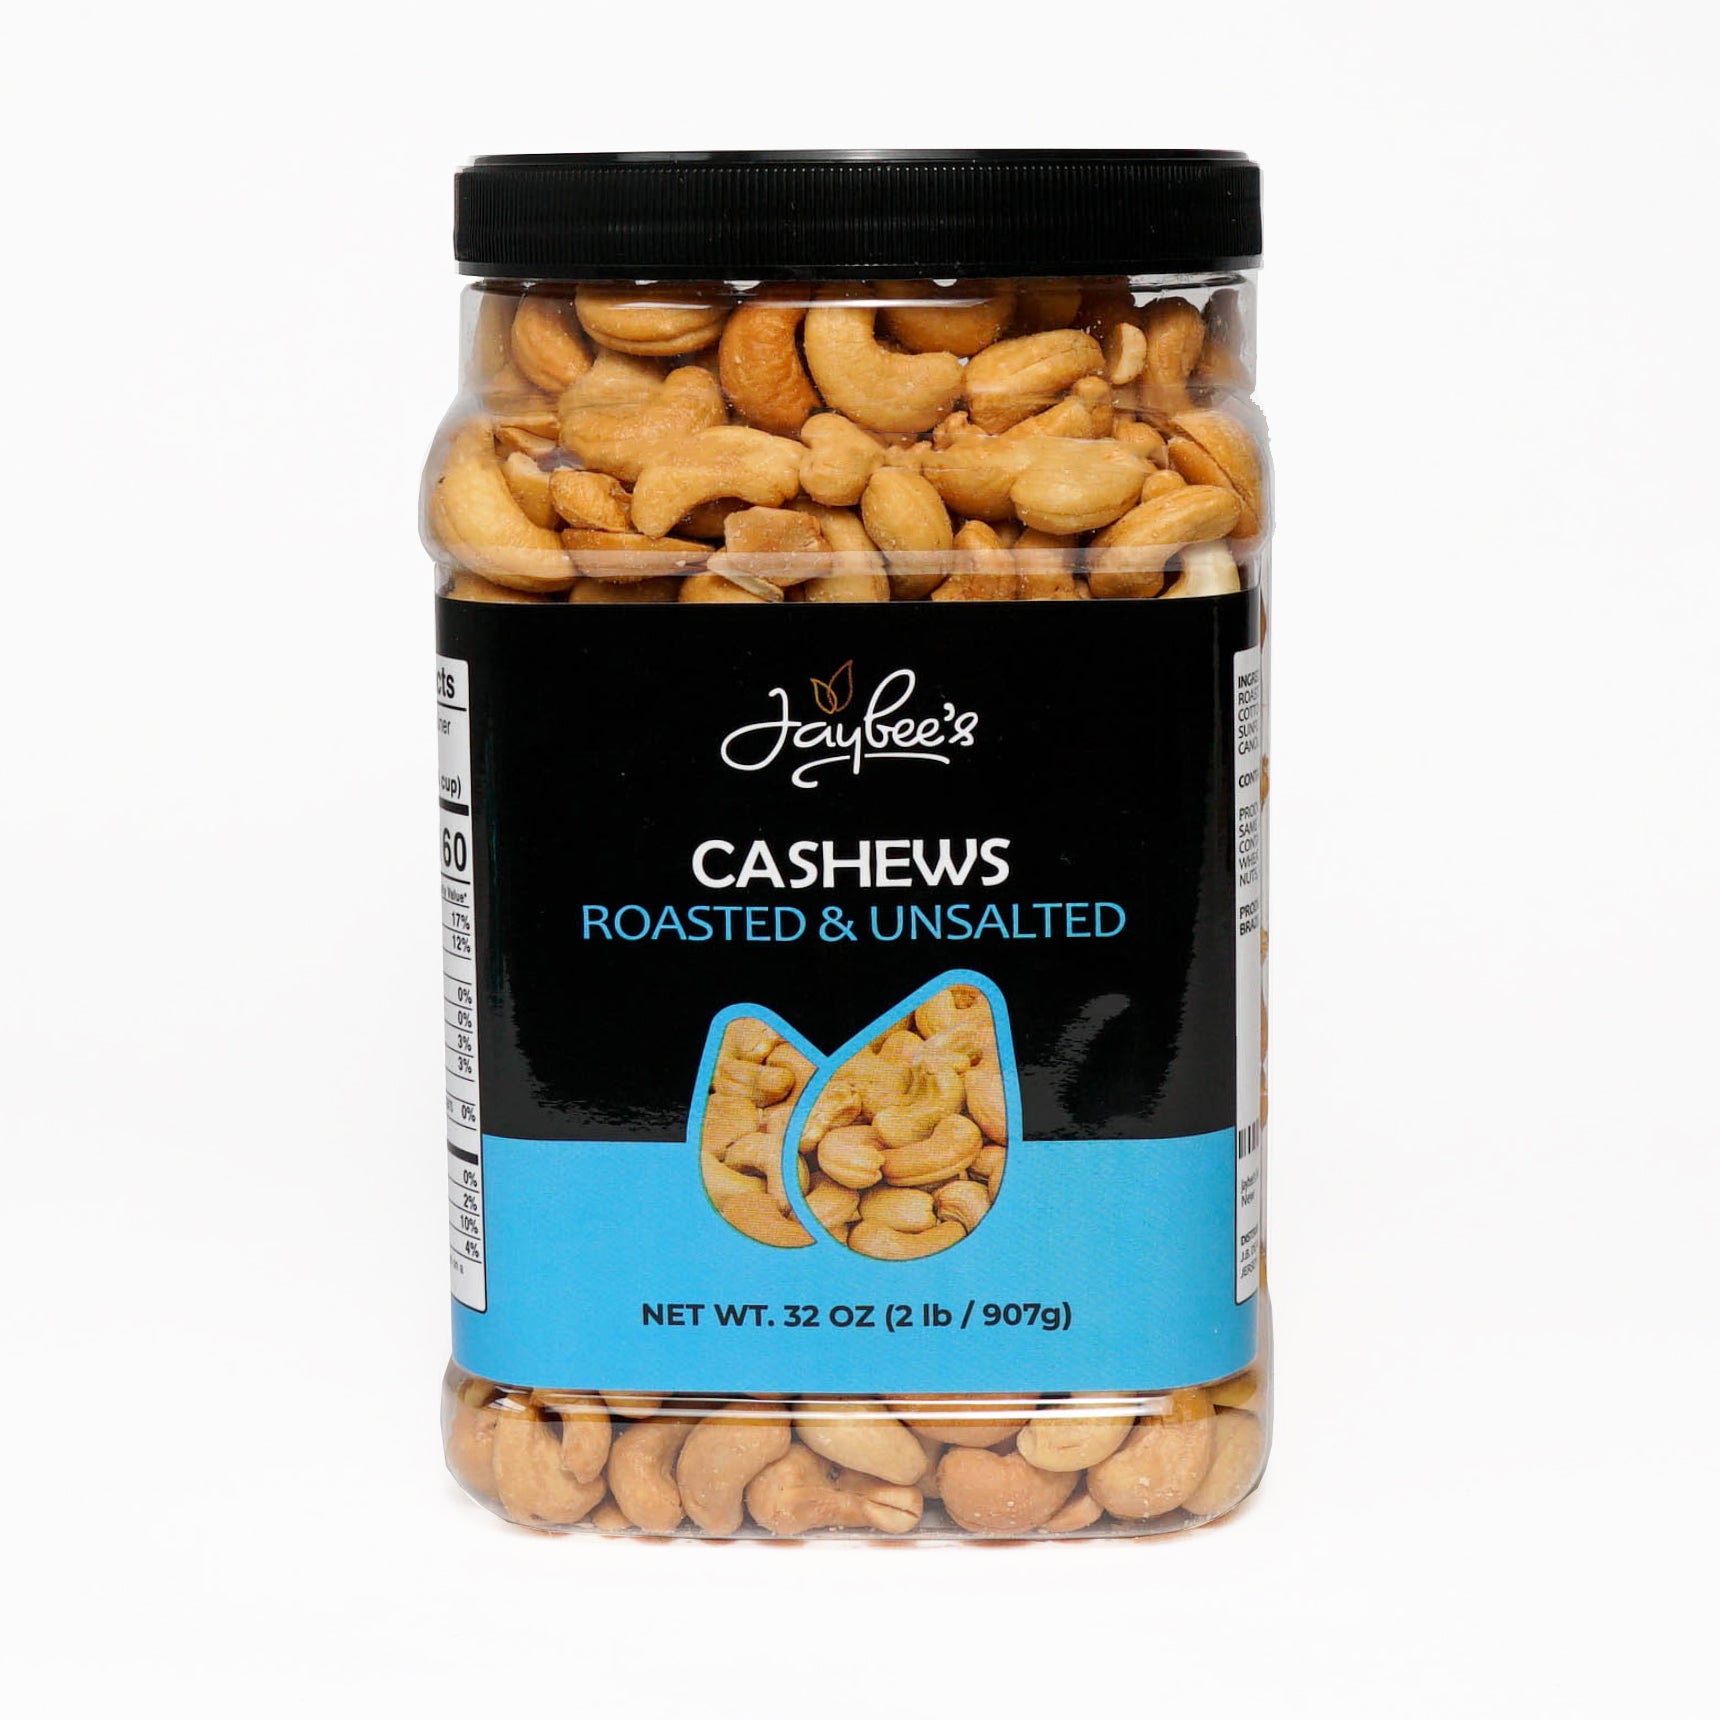 Cashews - Roasted & Unsalted